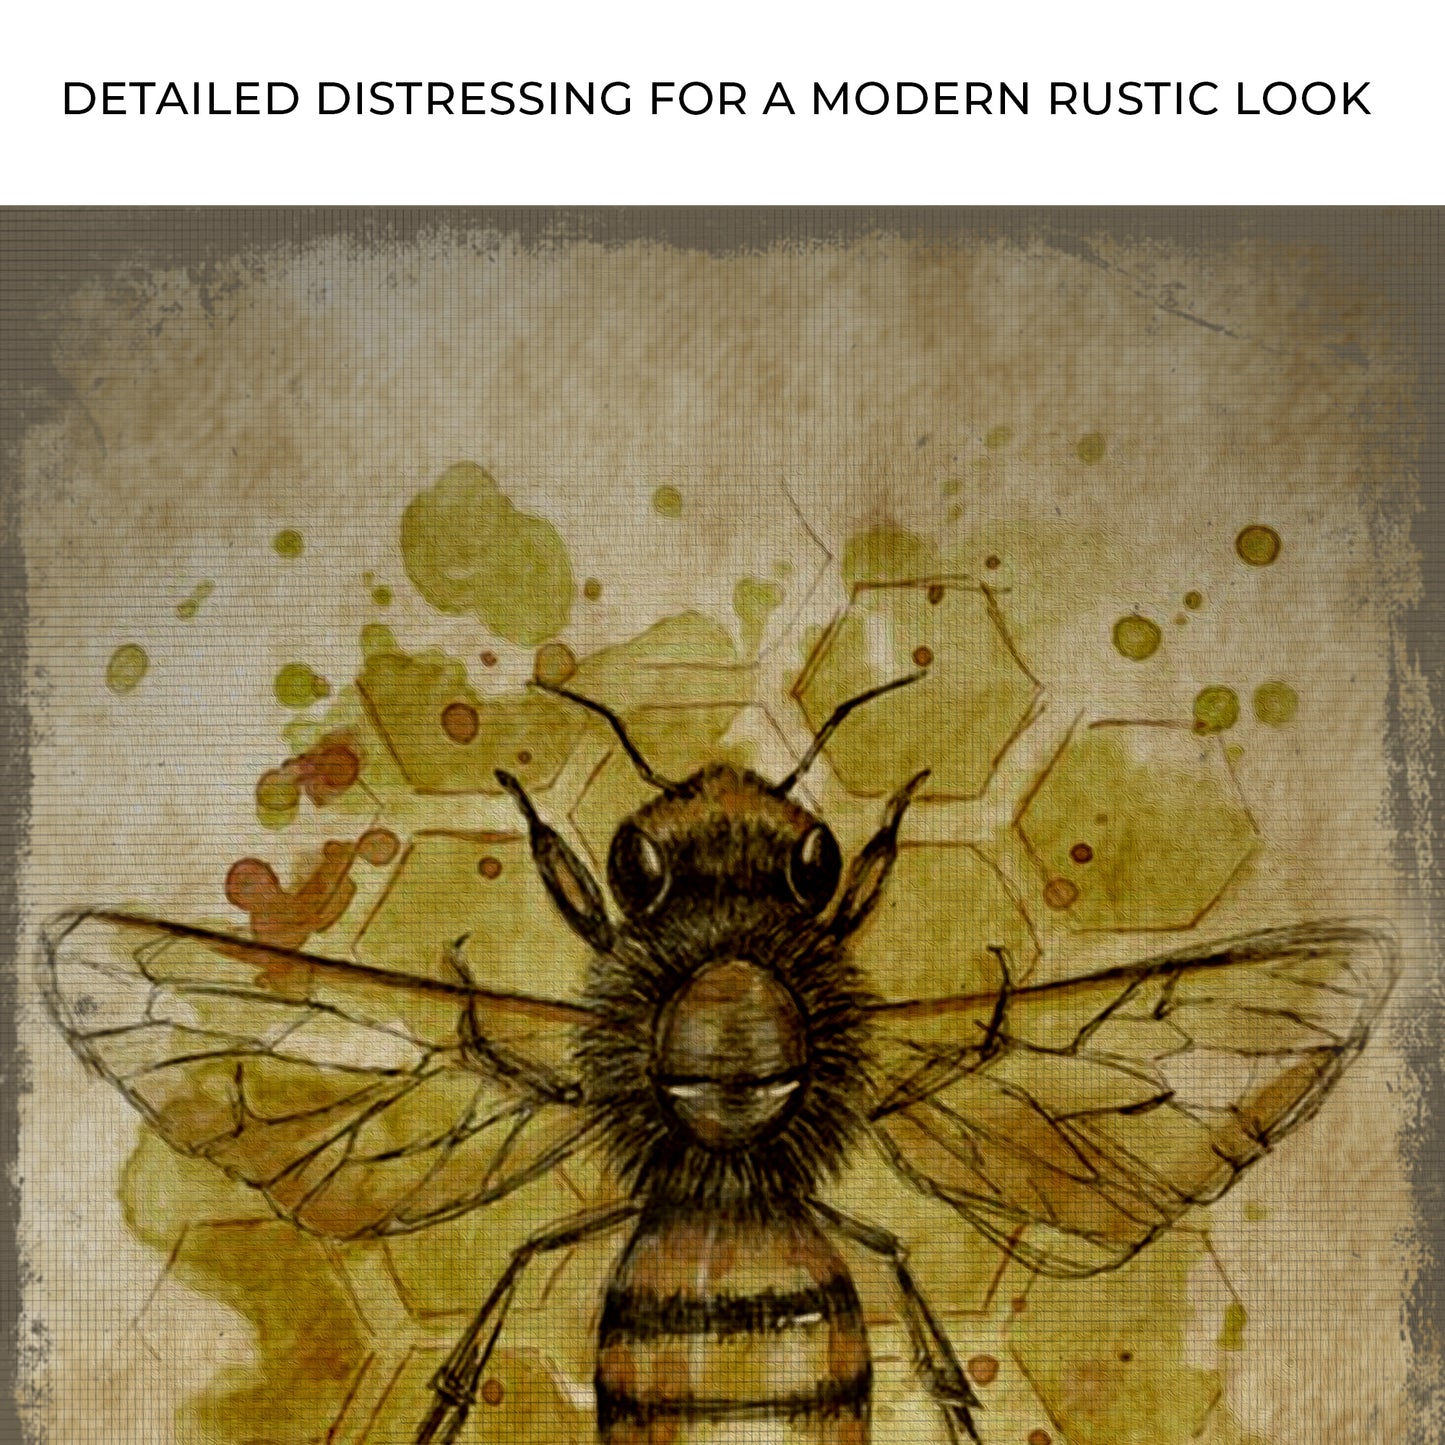 Rustic Queen Bee Canvas Wall Art Zoom - Image by Tailored Canvases